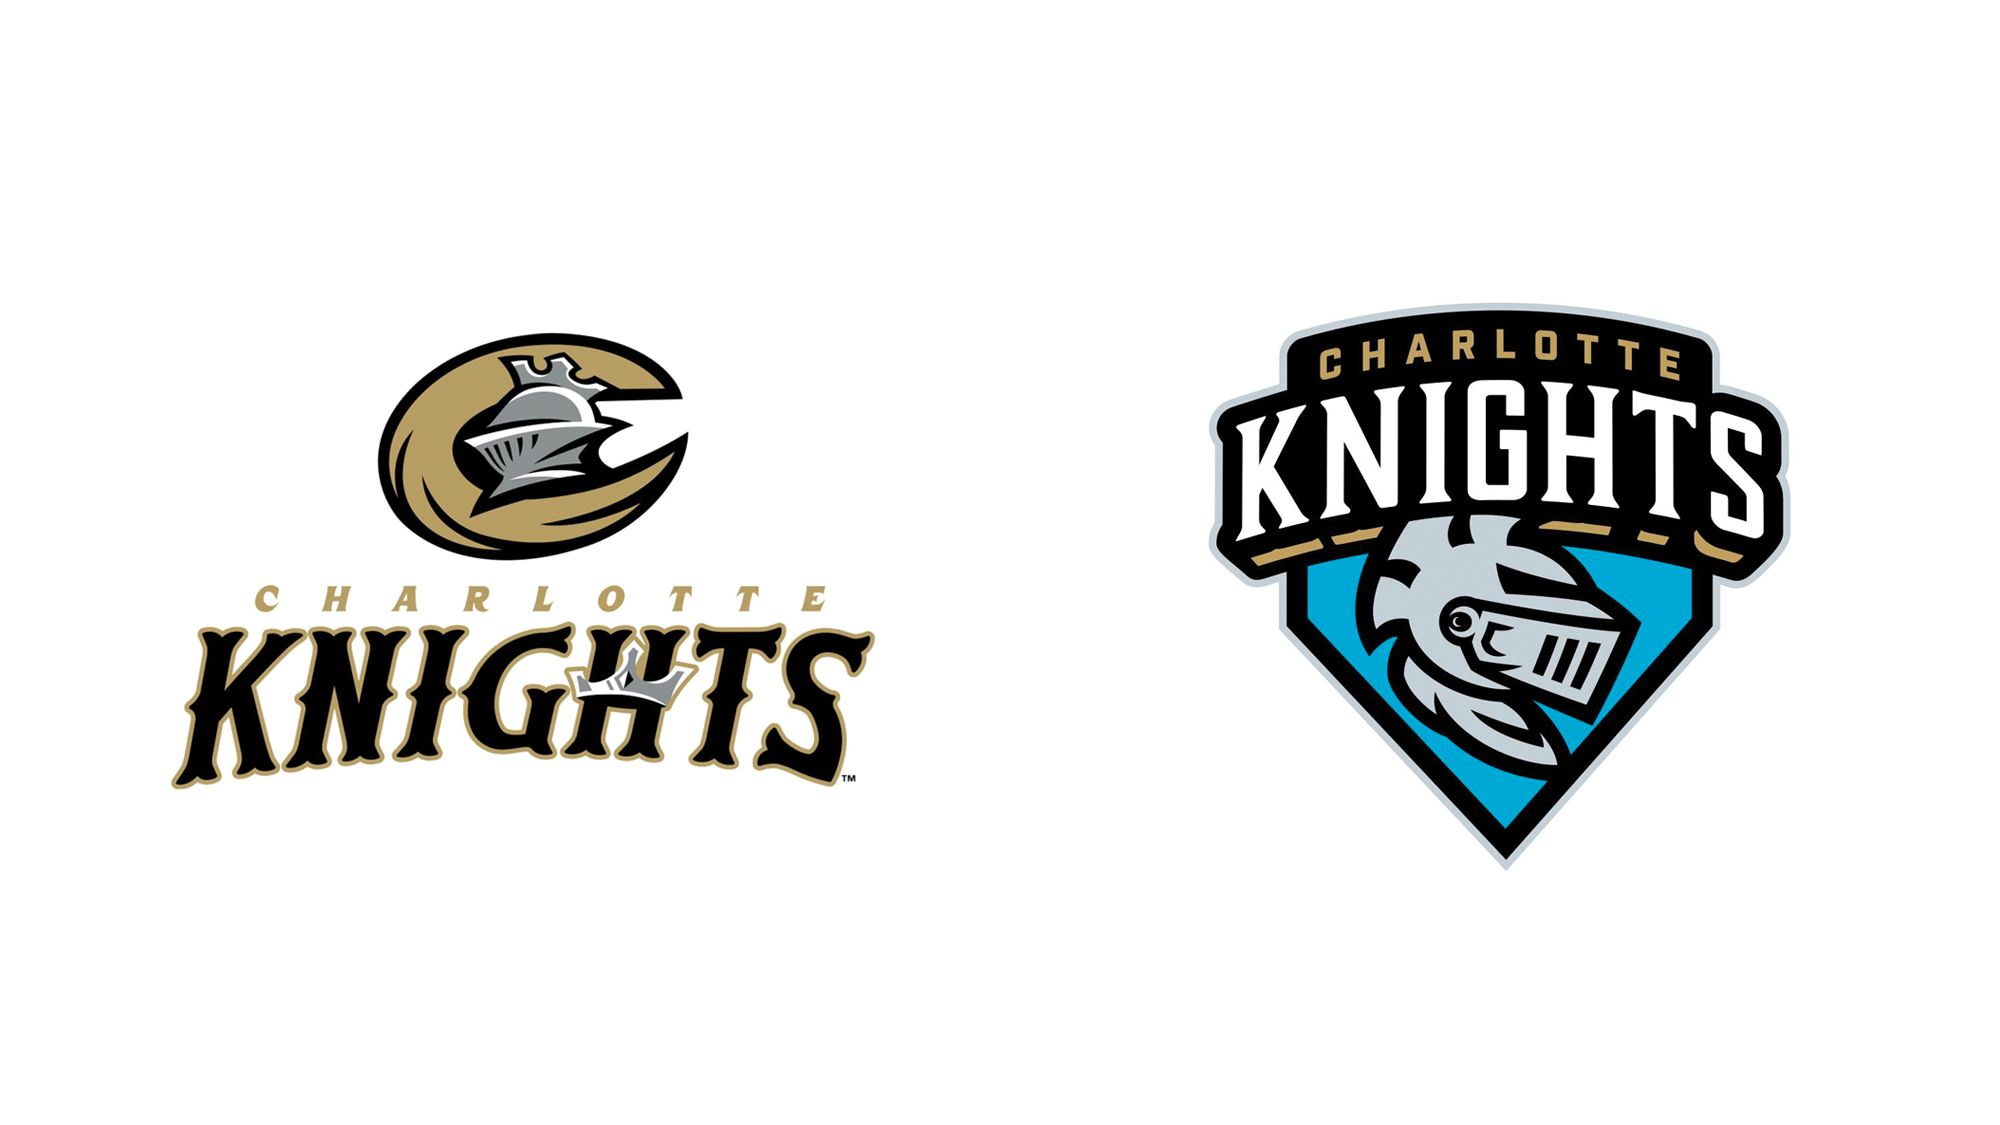 Charlotte Knights unveil logo and jersey to mark 20 years with the